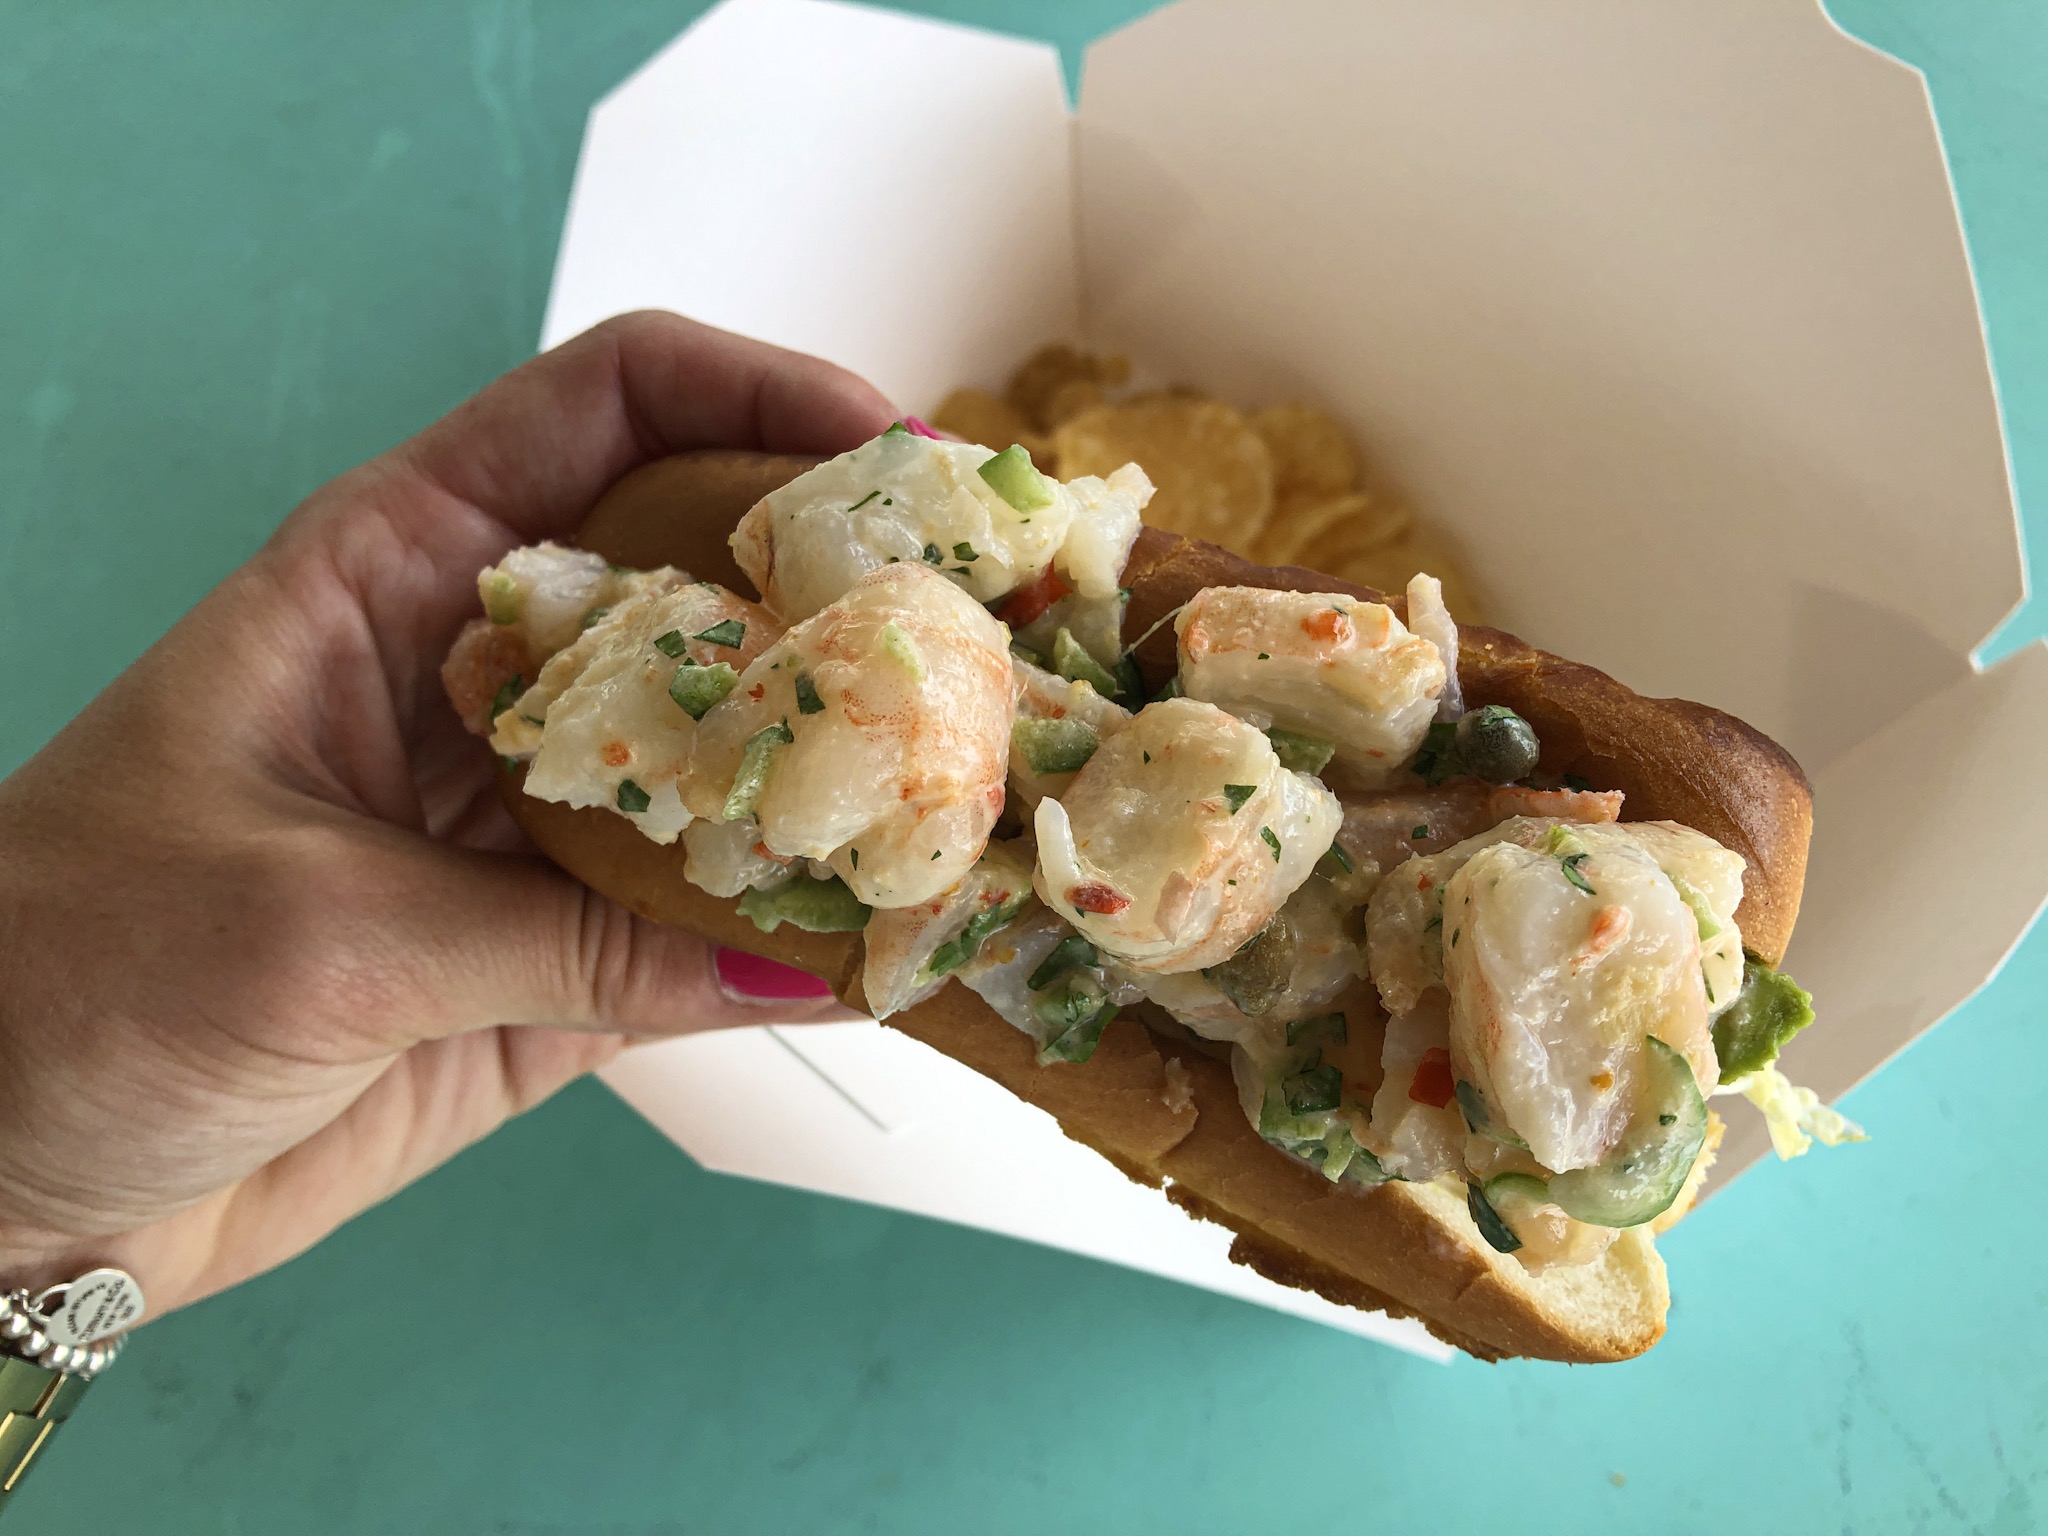 Shrimp Roll with Avocado, Sweet Ginger Thai Chili, Coconut Mayo, Jalapeno, Cilantro and Capers from Modern Brine inside the Baum Ave Market